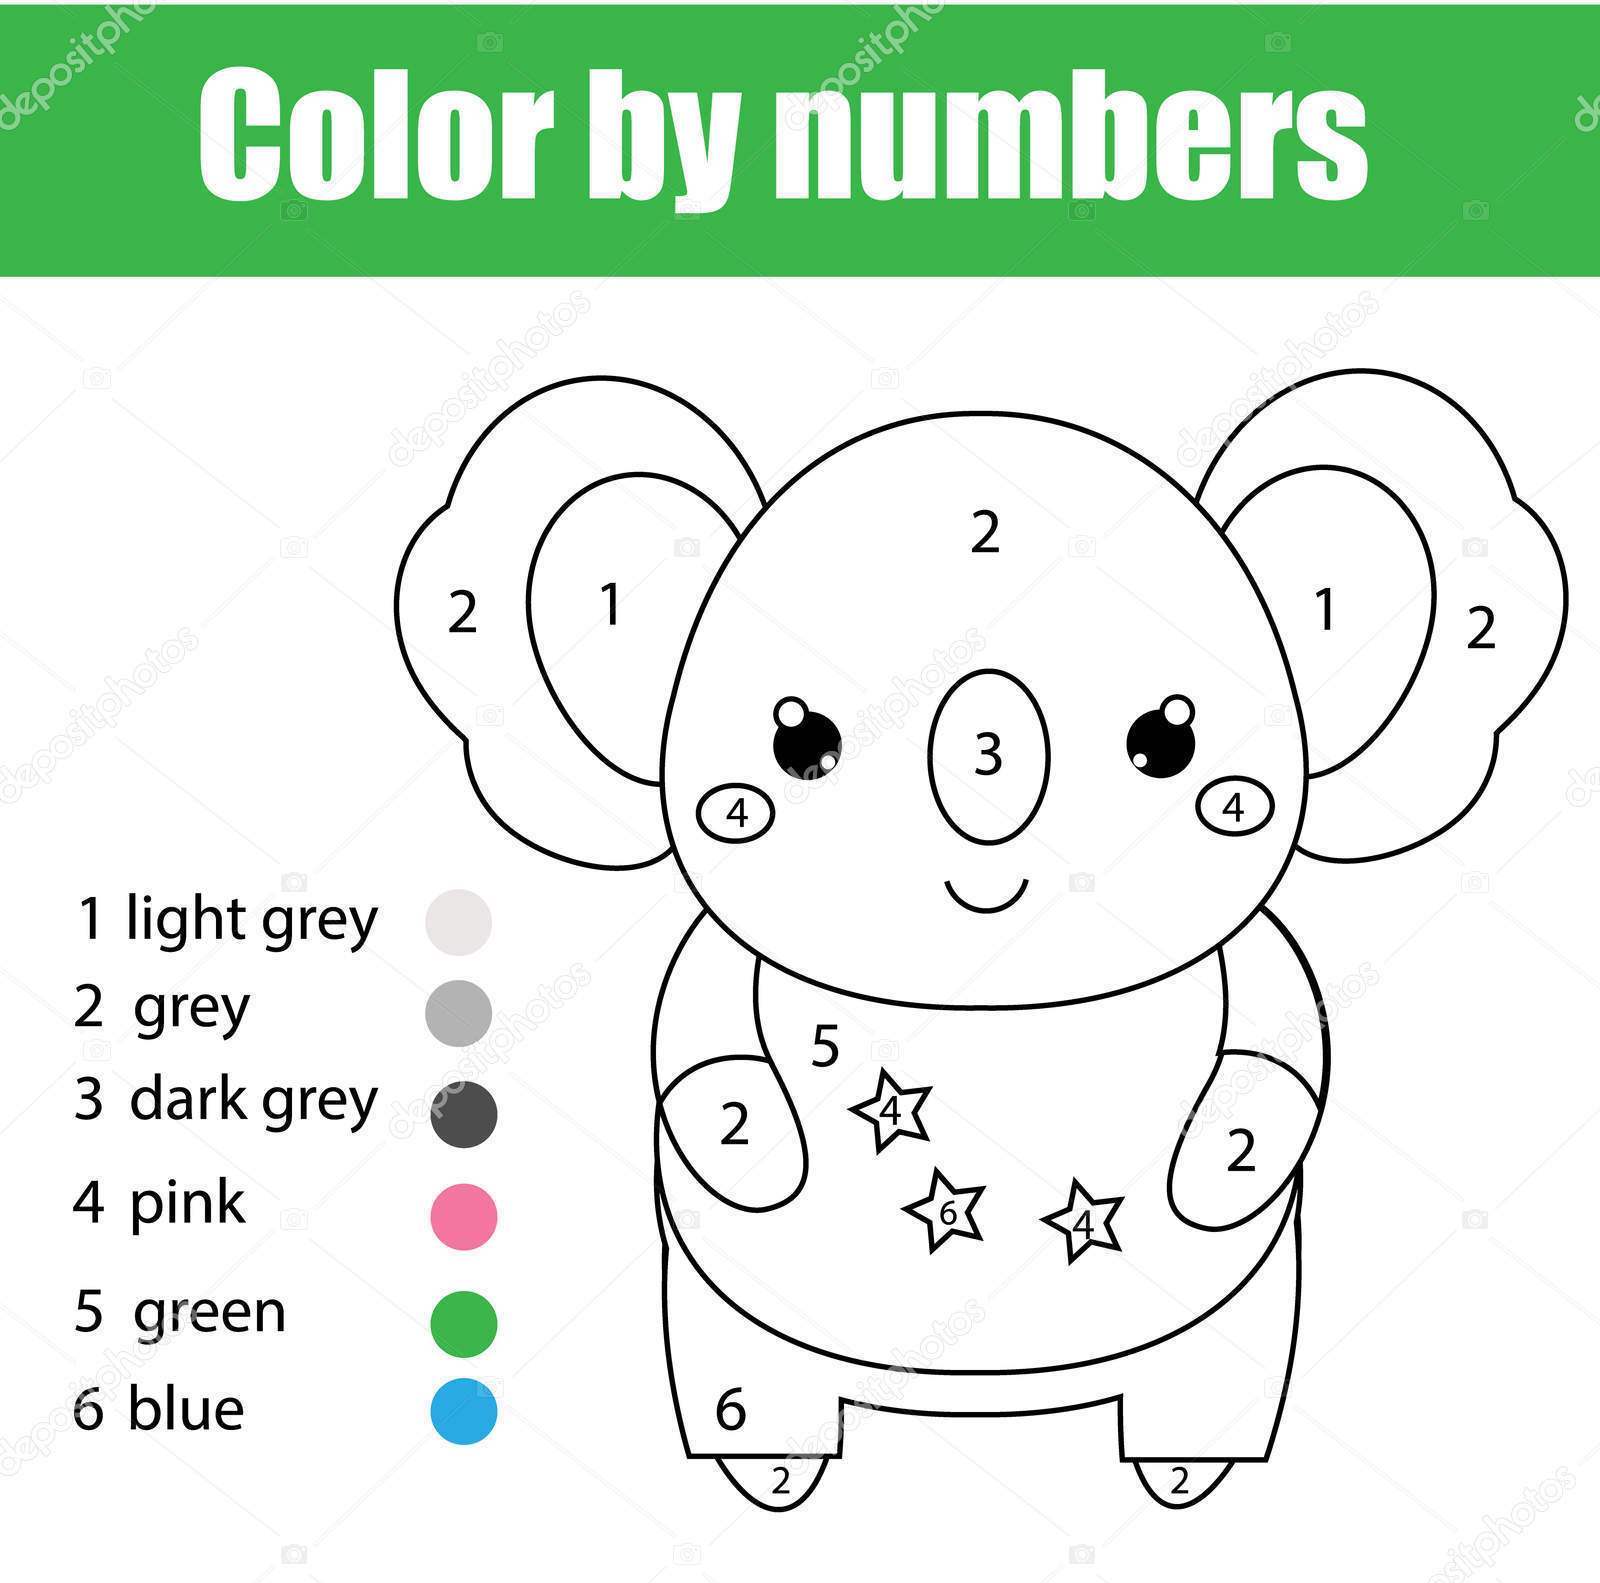 depositphotos_187482734-stock-illustration-children-educational-game-coloring-page.jpg